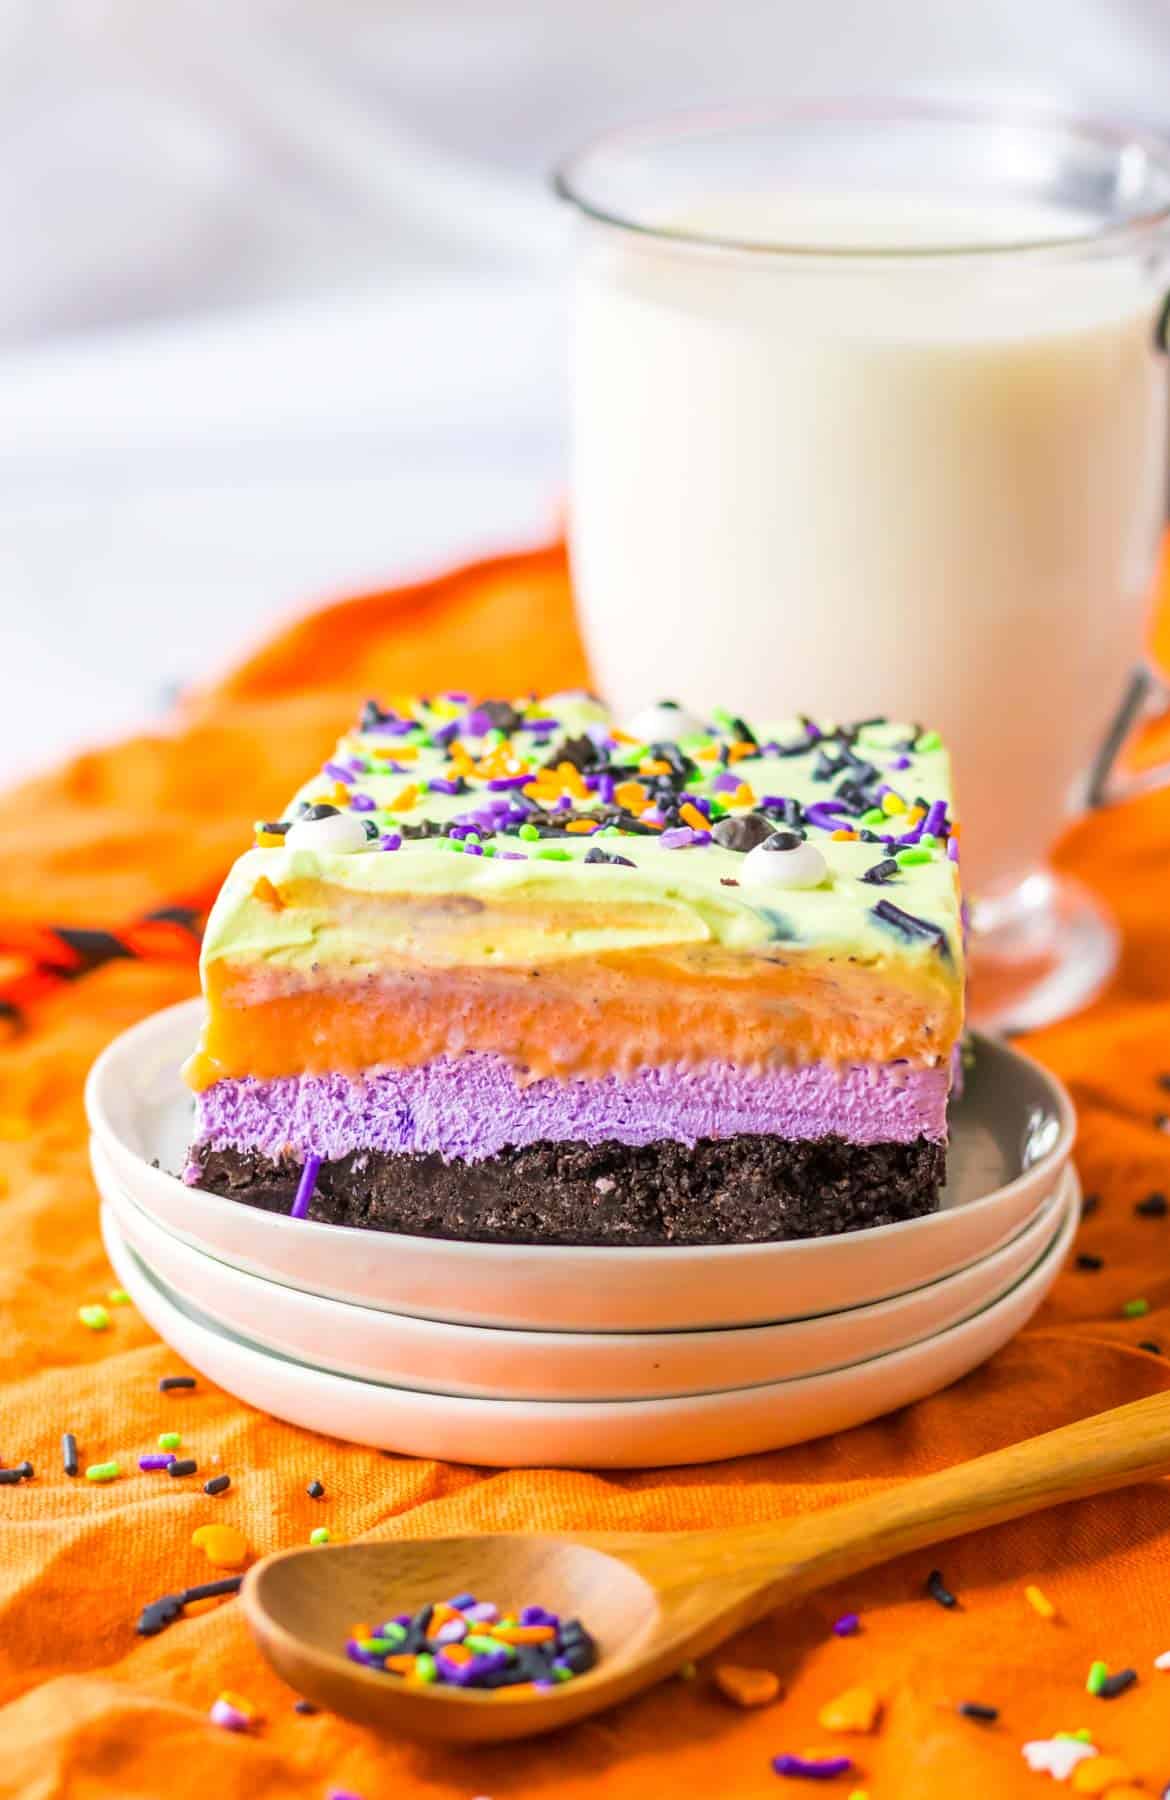 A plate of purple, orange and green cake with a spoon and a glass of milk.